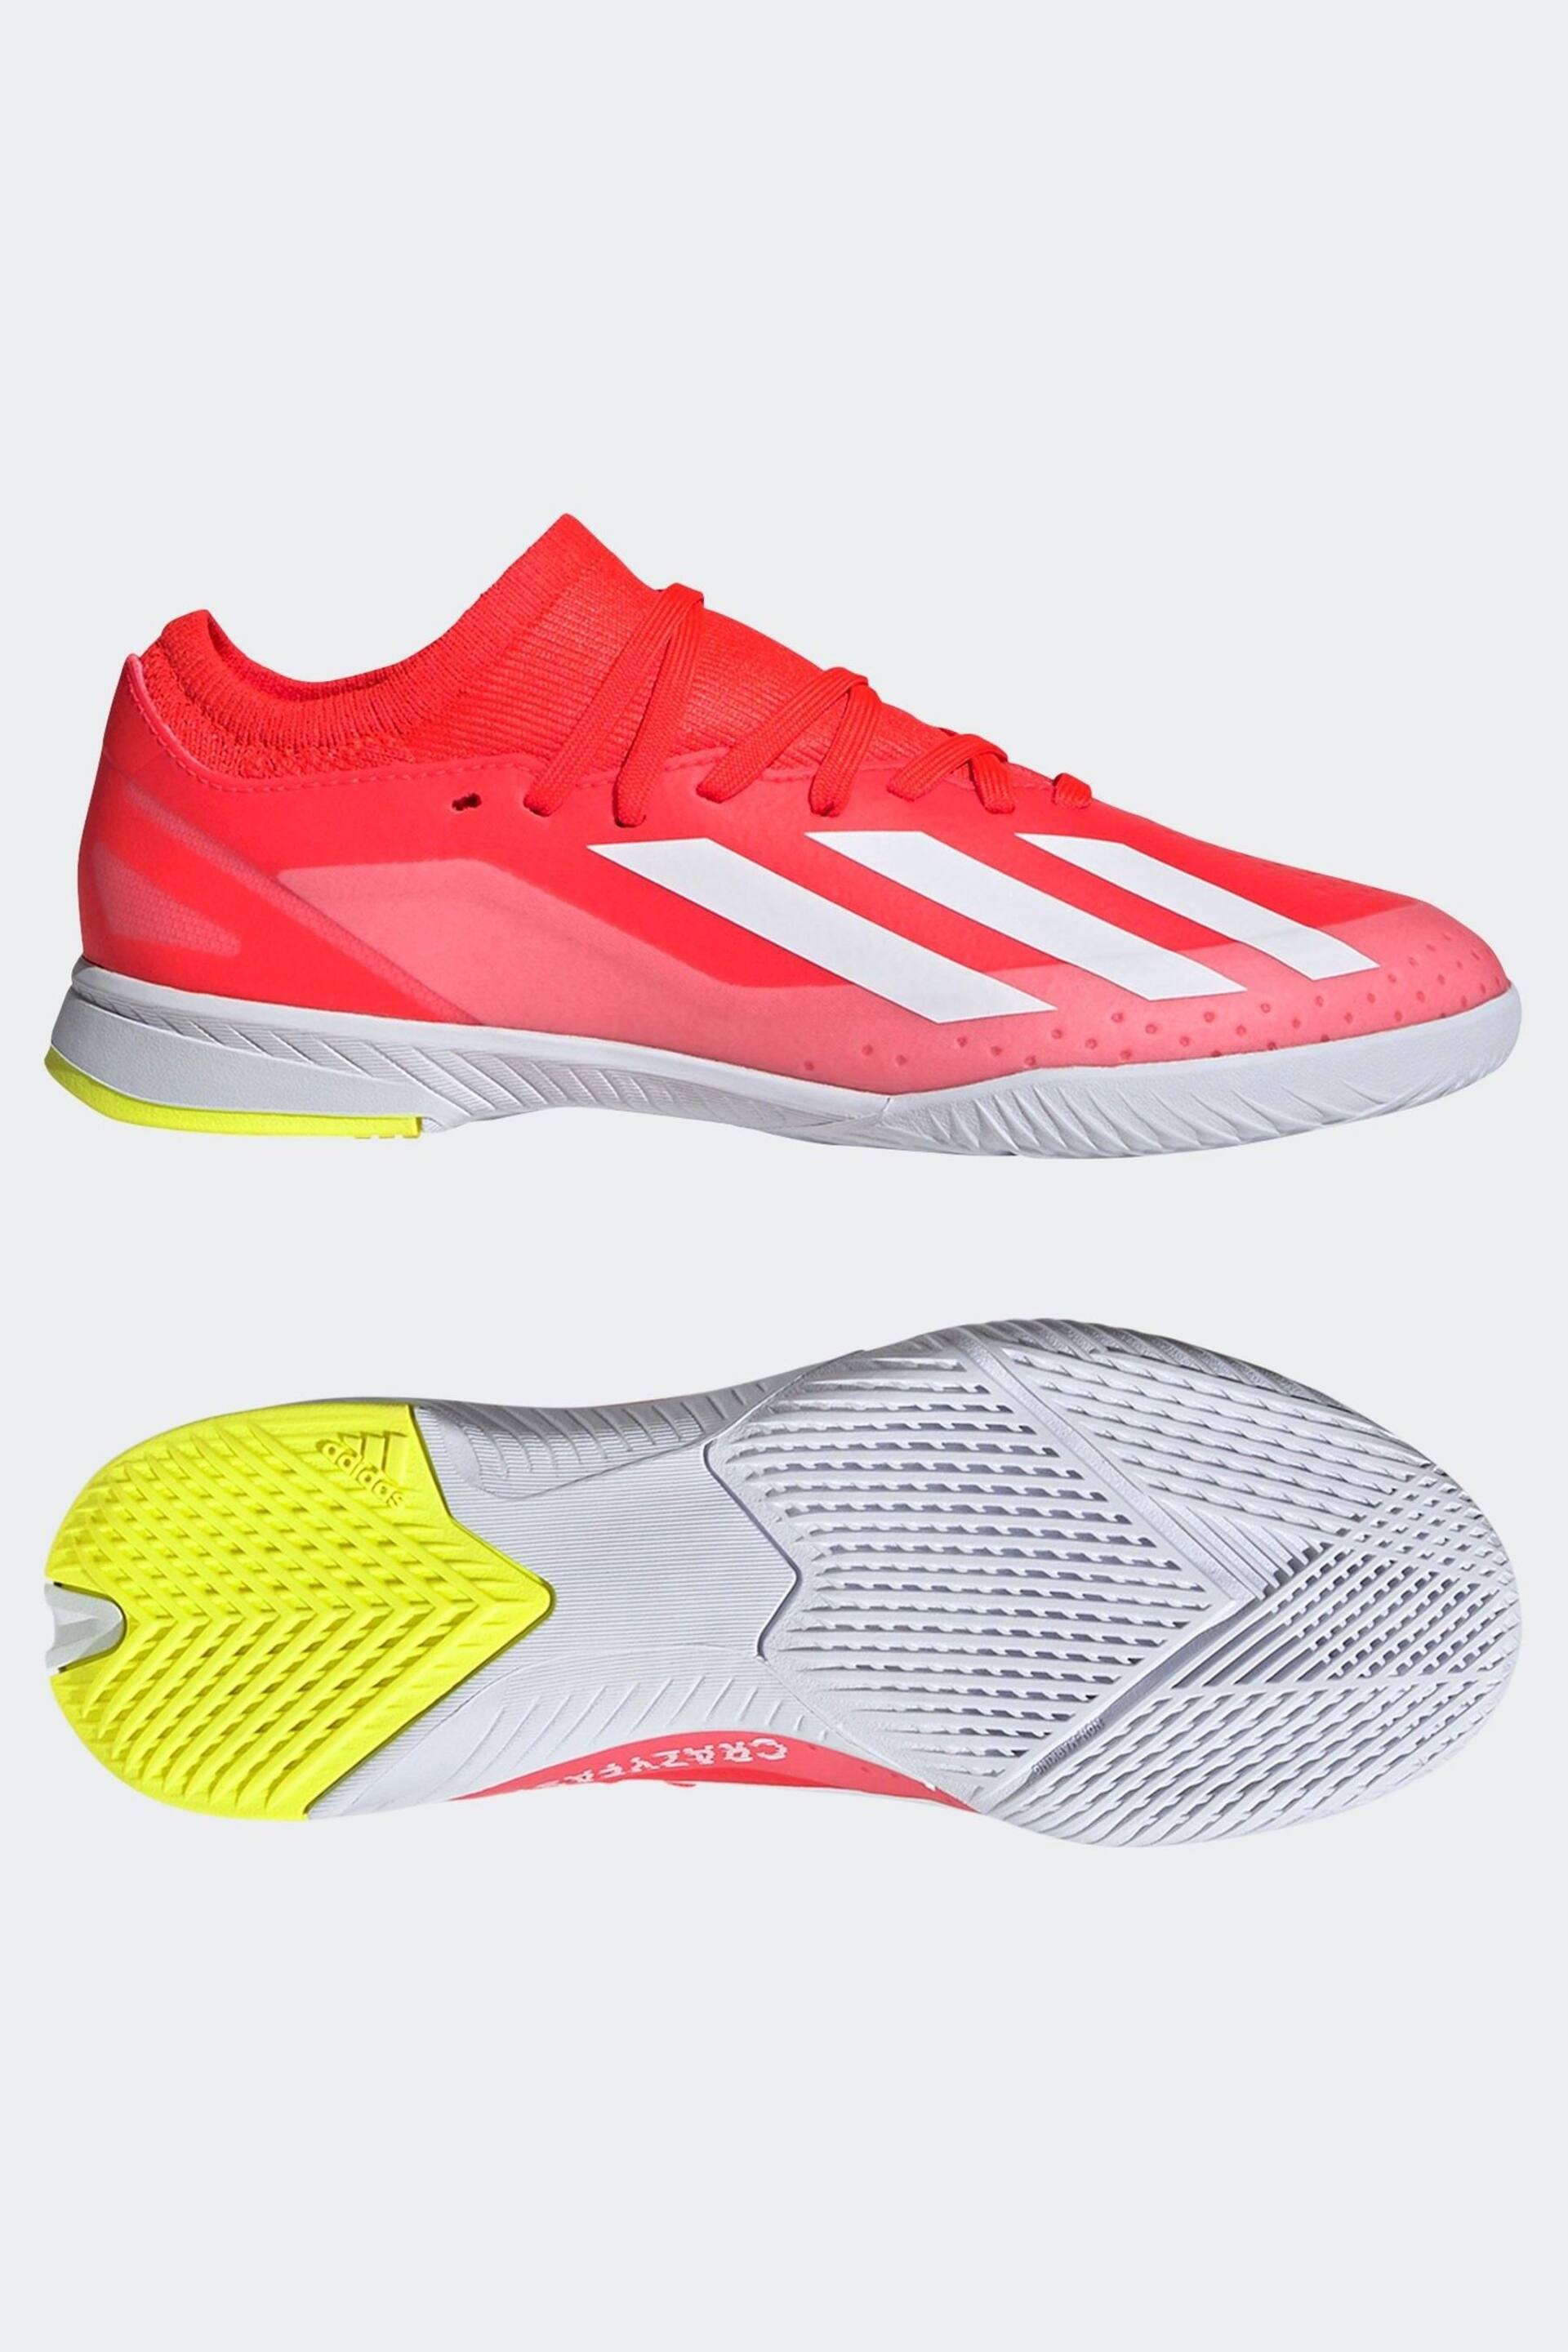 adidas Red/White Football X Crazyfast League Indoor Kids Boots - Image 13 of 20